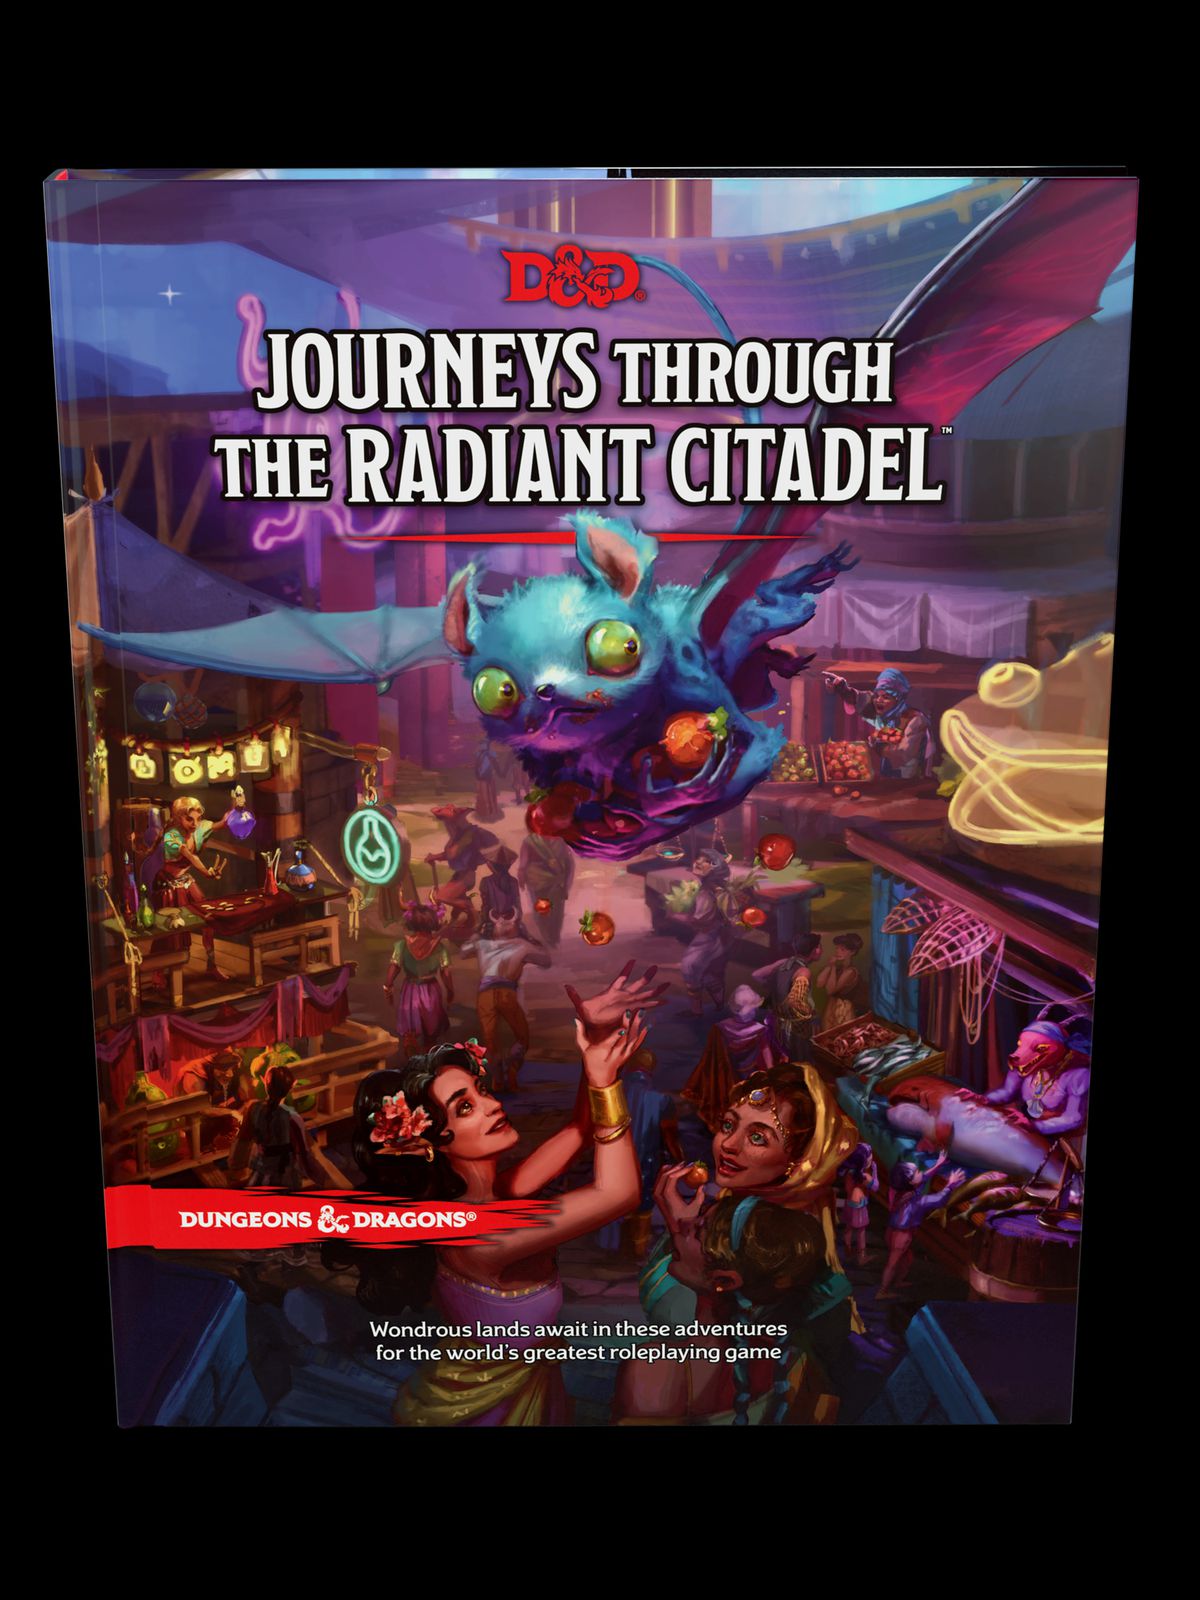 A mock-up of the standard cover of Journeys Through the Radiant Citadel